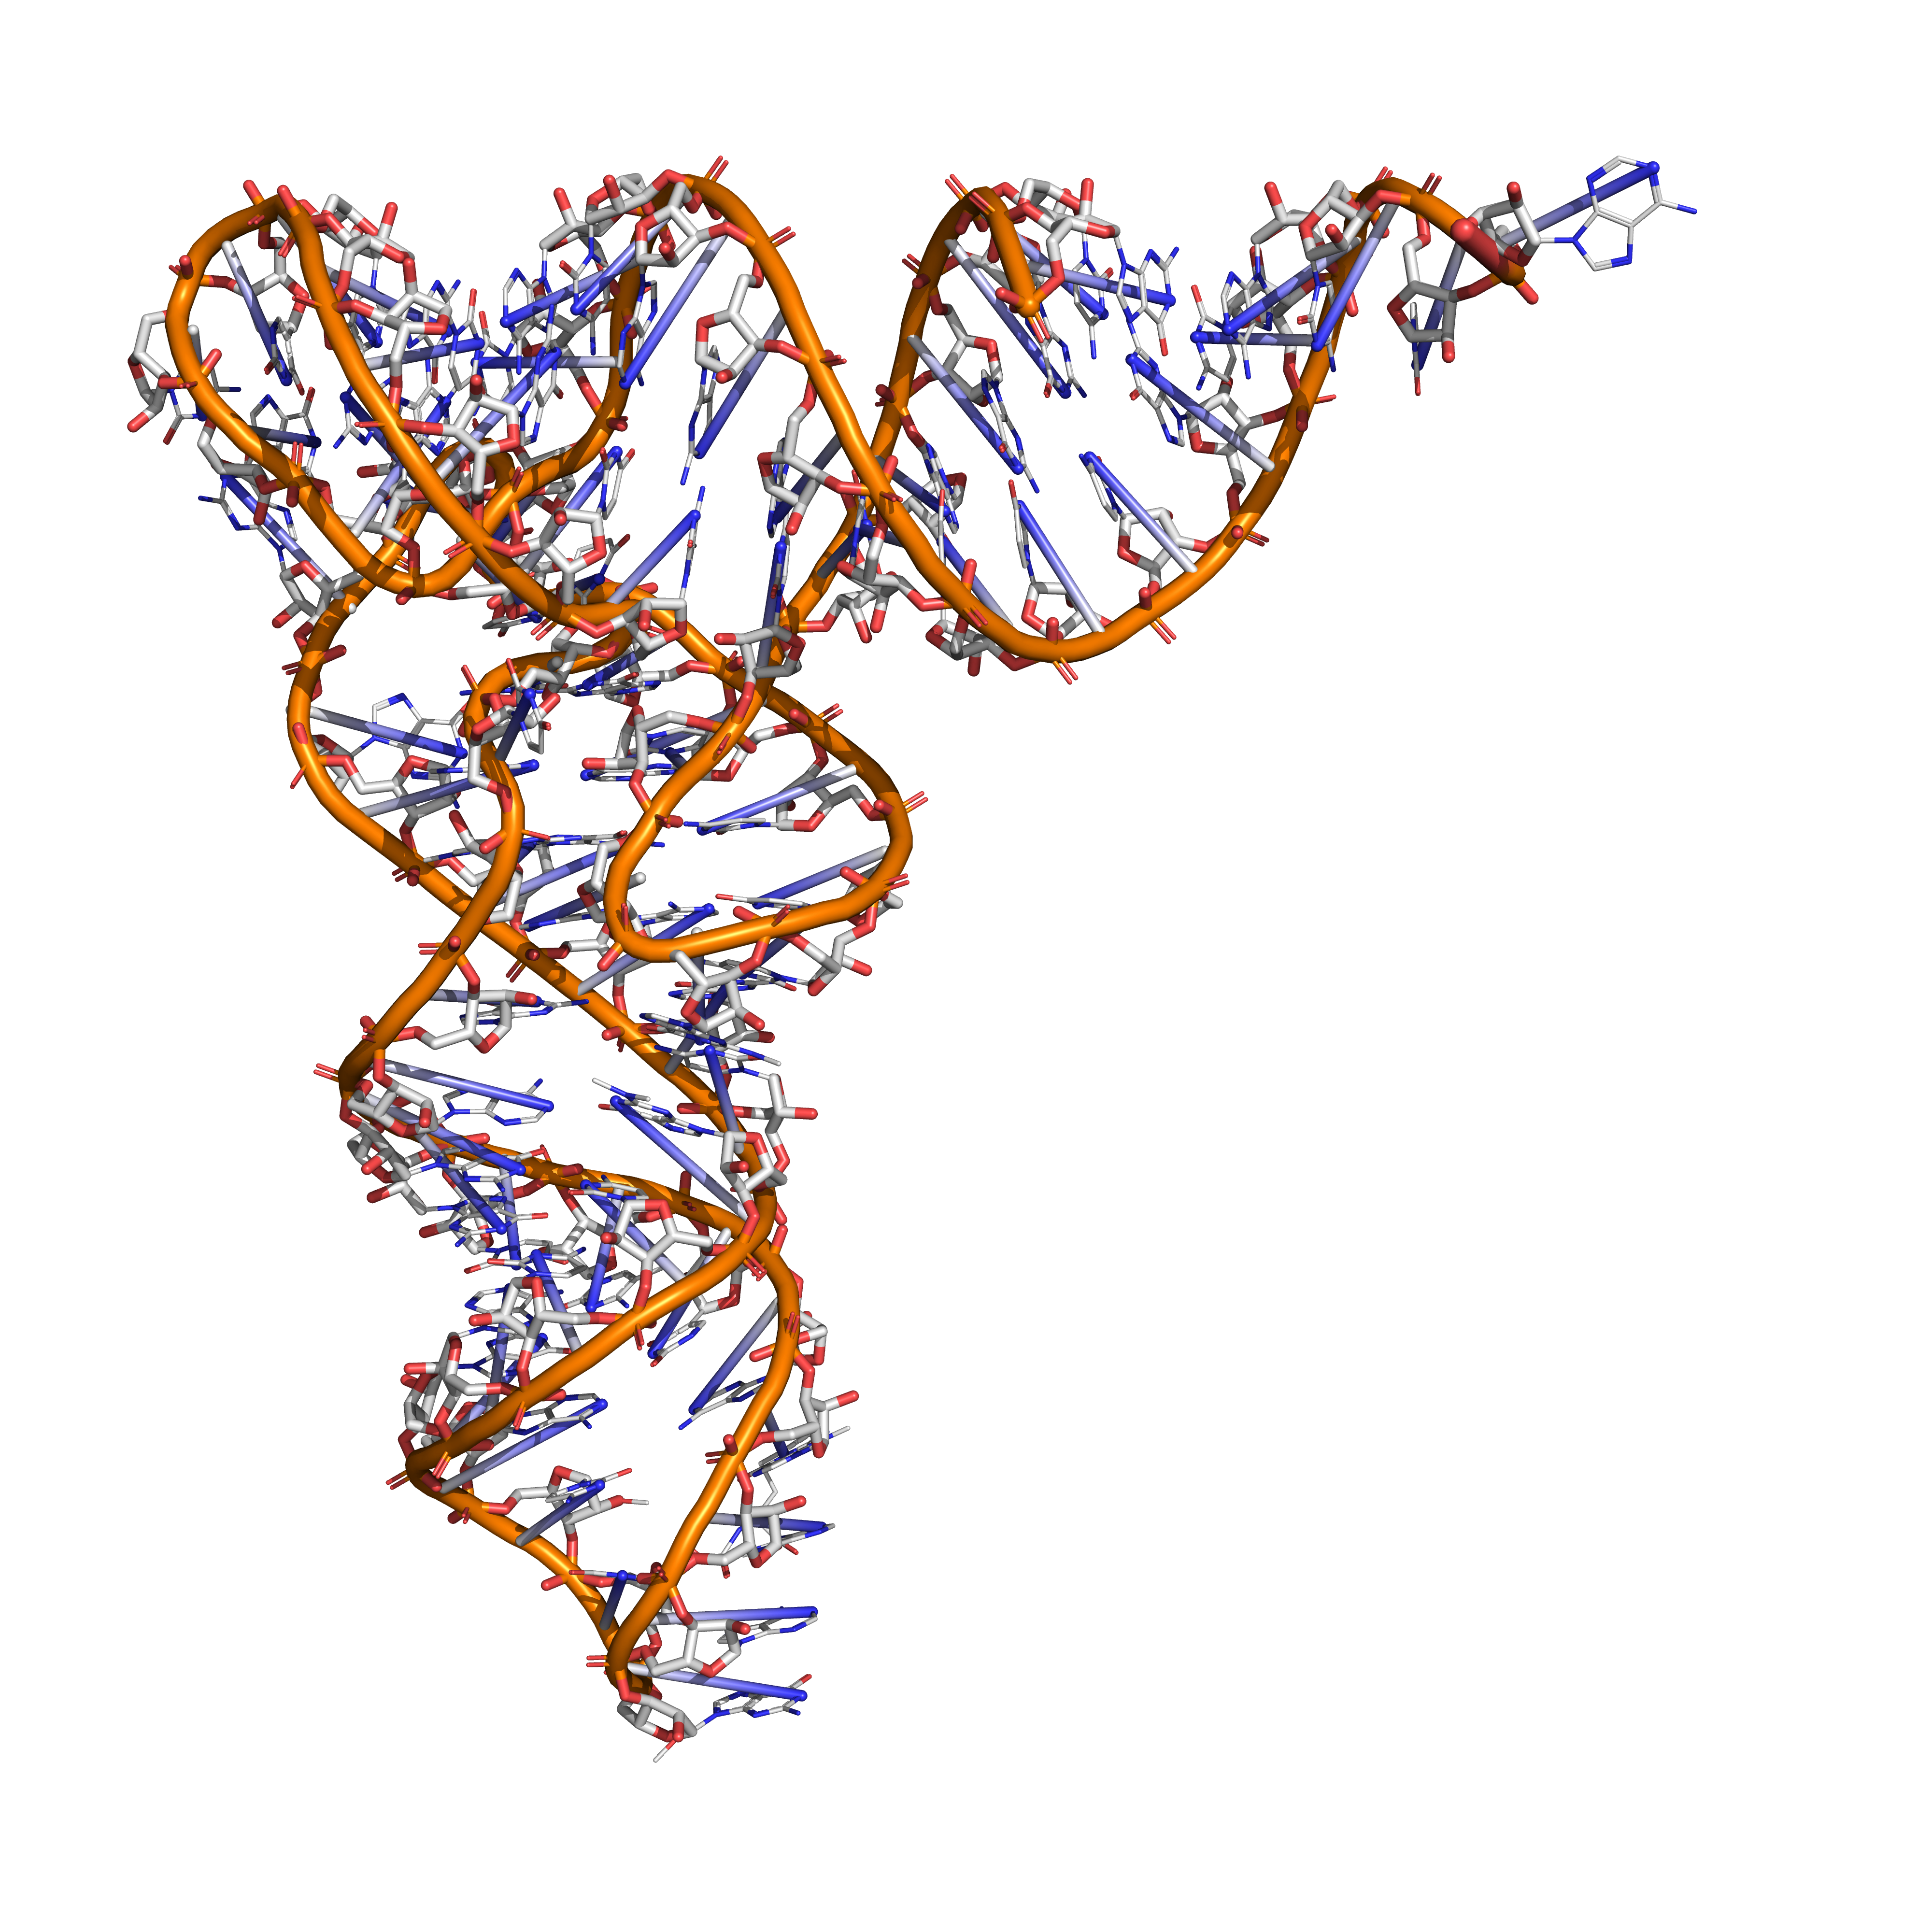 Tertiary structure of tRNA (based on atomic coordinates of PDB 1ehz rendered with open source molecular visualization tool PyMol.)